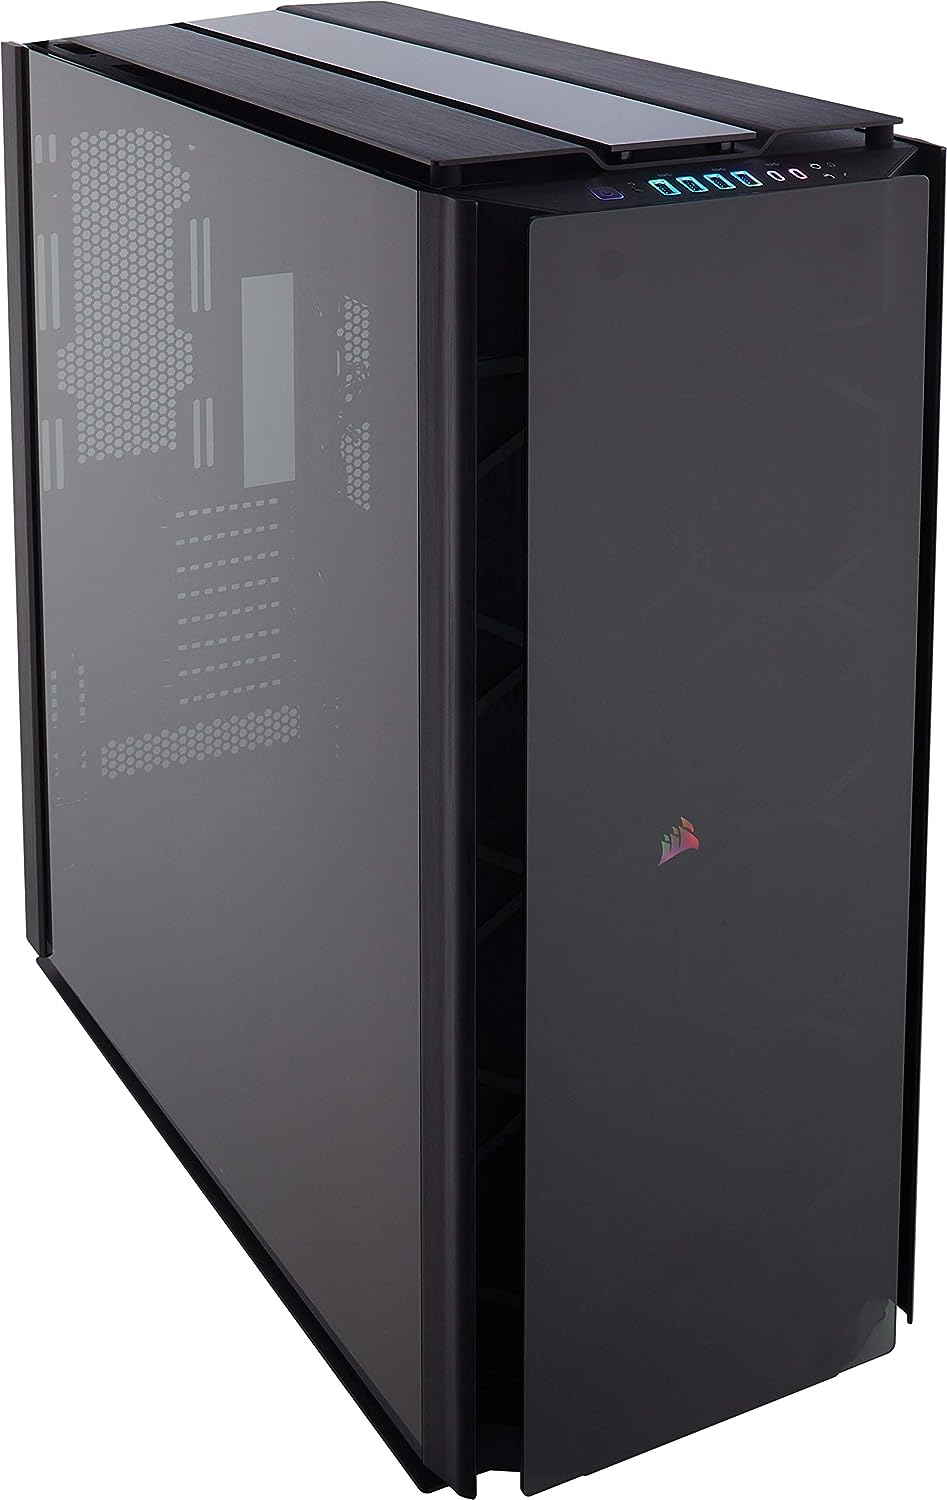 Corsair Obsidian Series 1000D Super-Tower Case: The Ultimate Gaming Powerhouse